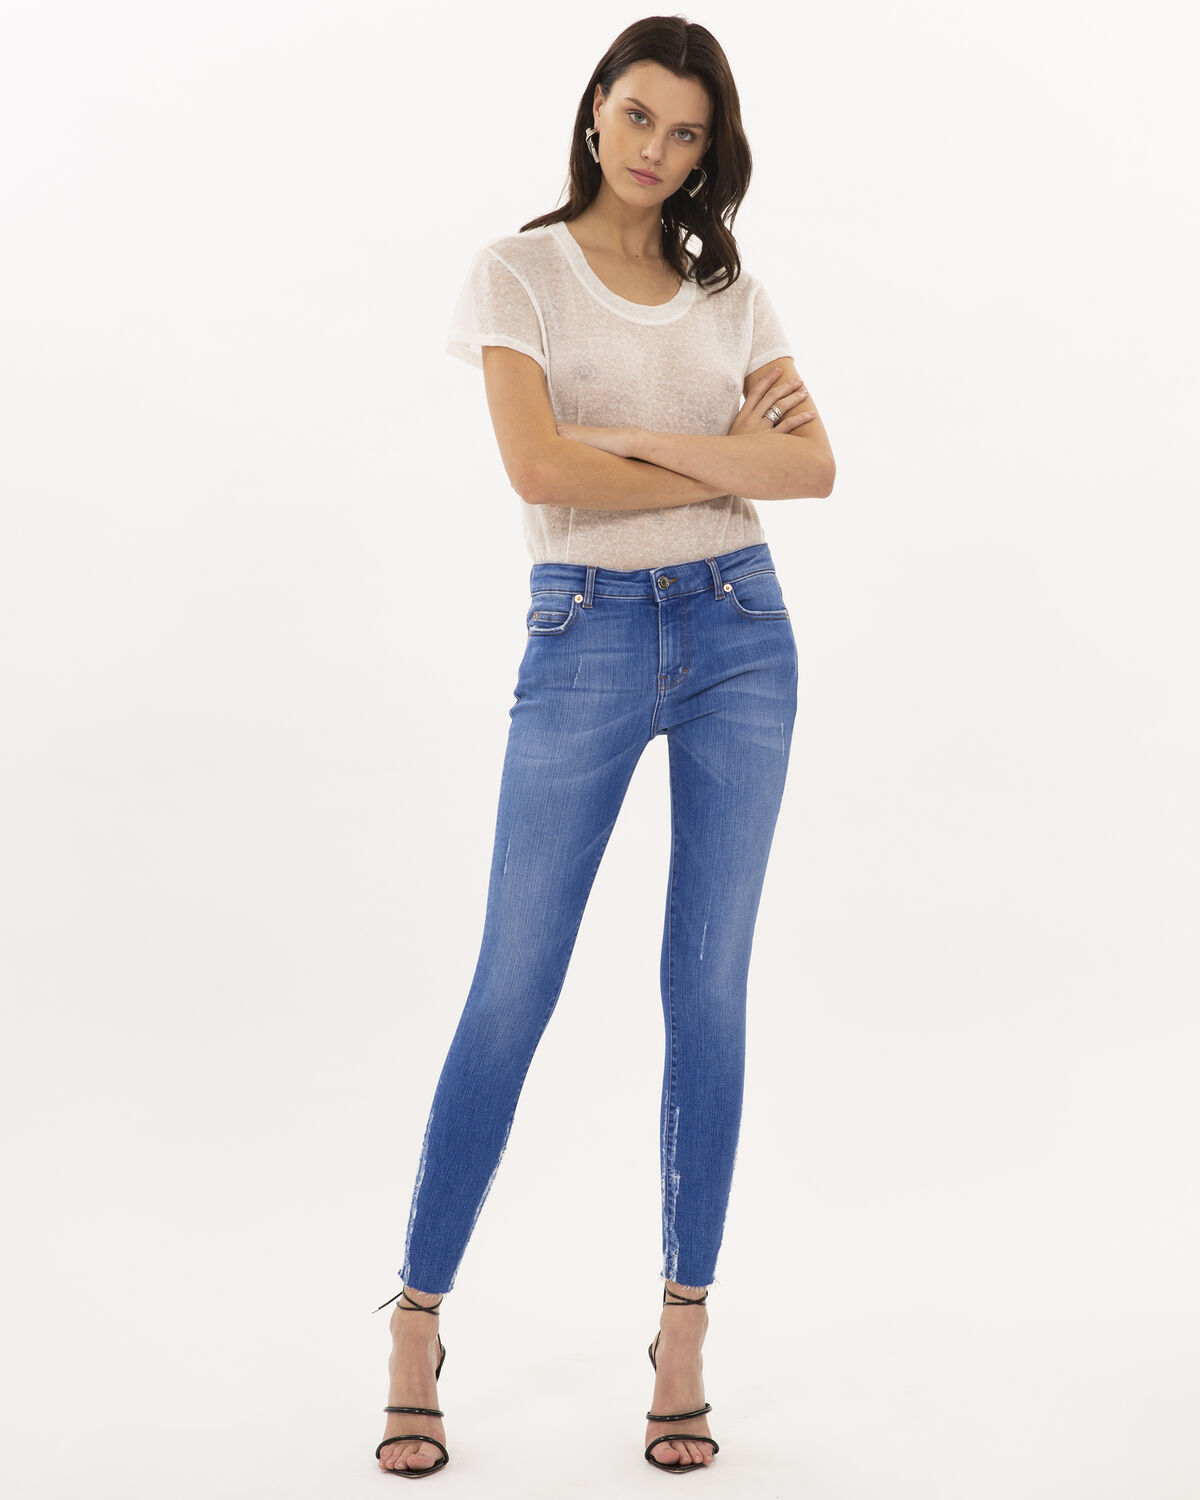 Photo of IRO Paris Candy Jeans Blue - These Denim Skinny Pants Are Distinguished By Their Destroys And Openwork Details. Wear Them With A Pair Of Pumps For A Resolutely Rock And Modern Look. Denim